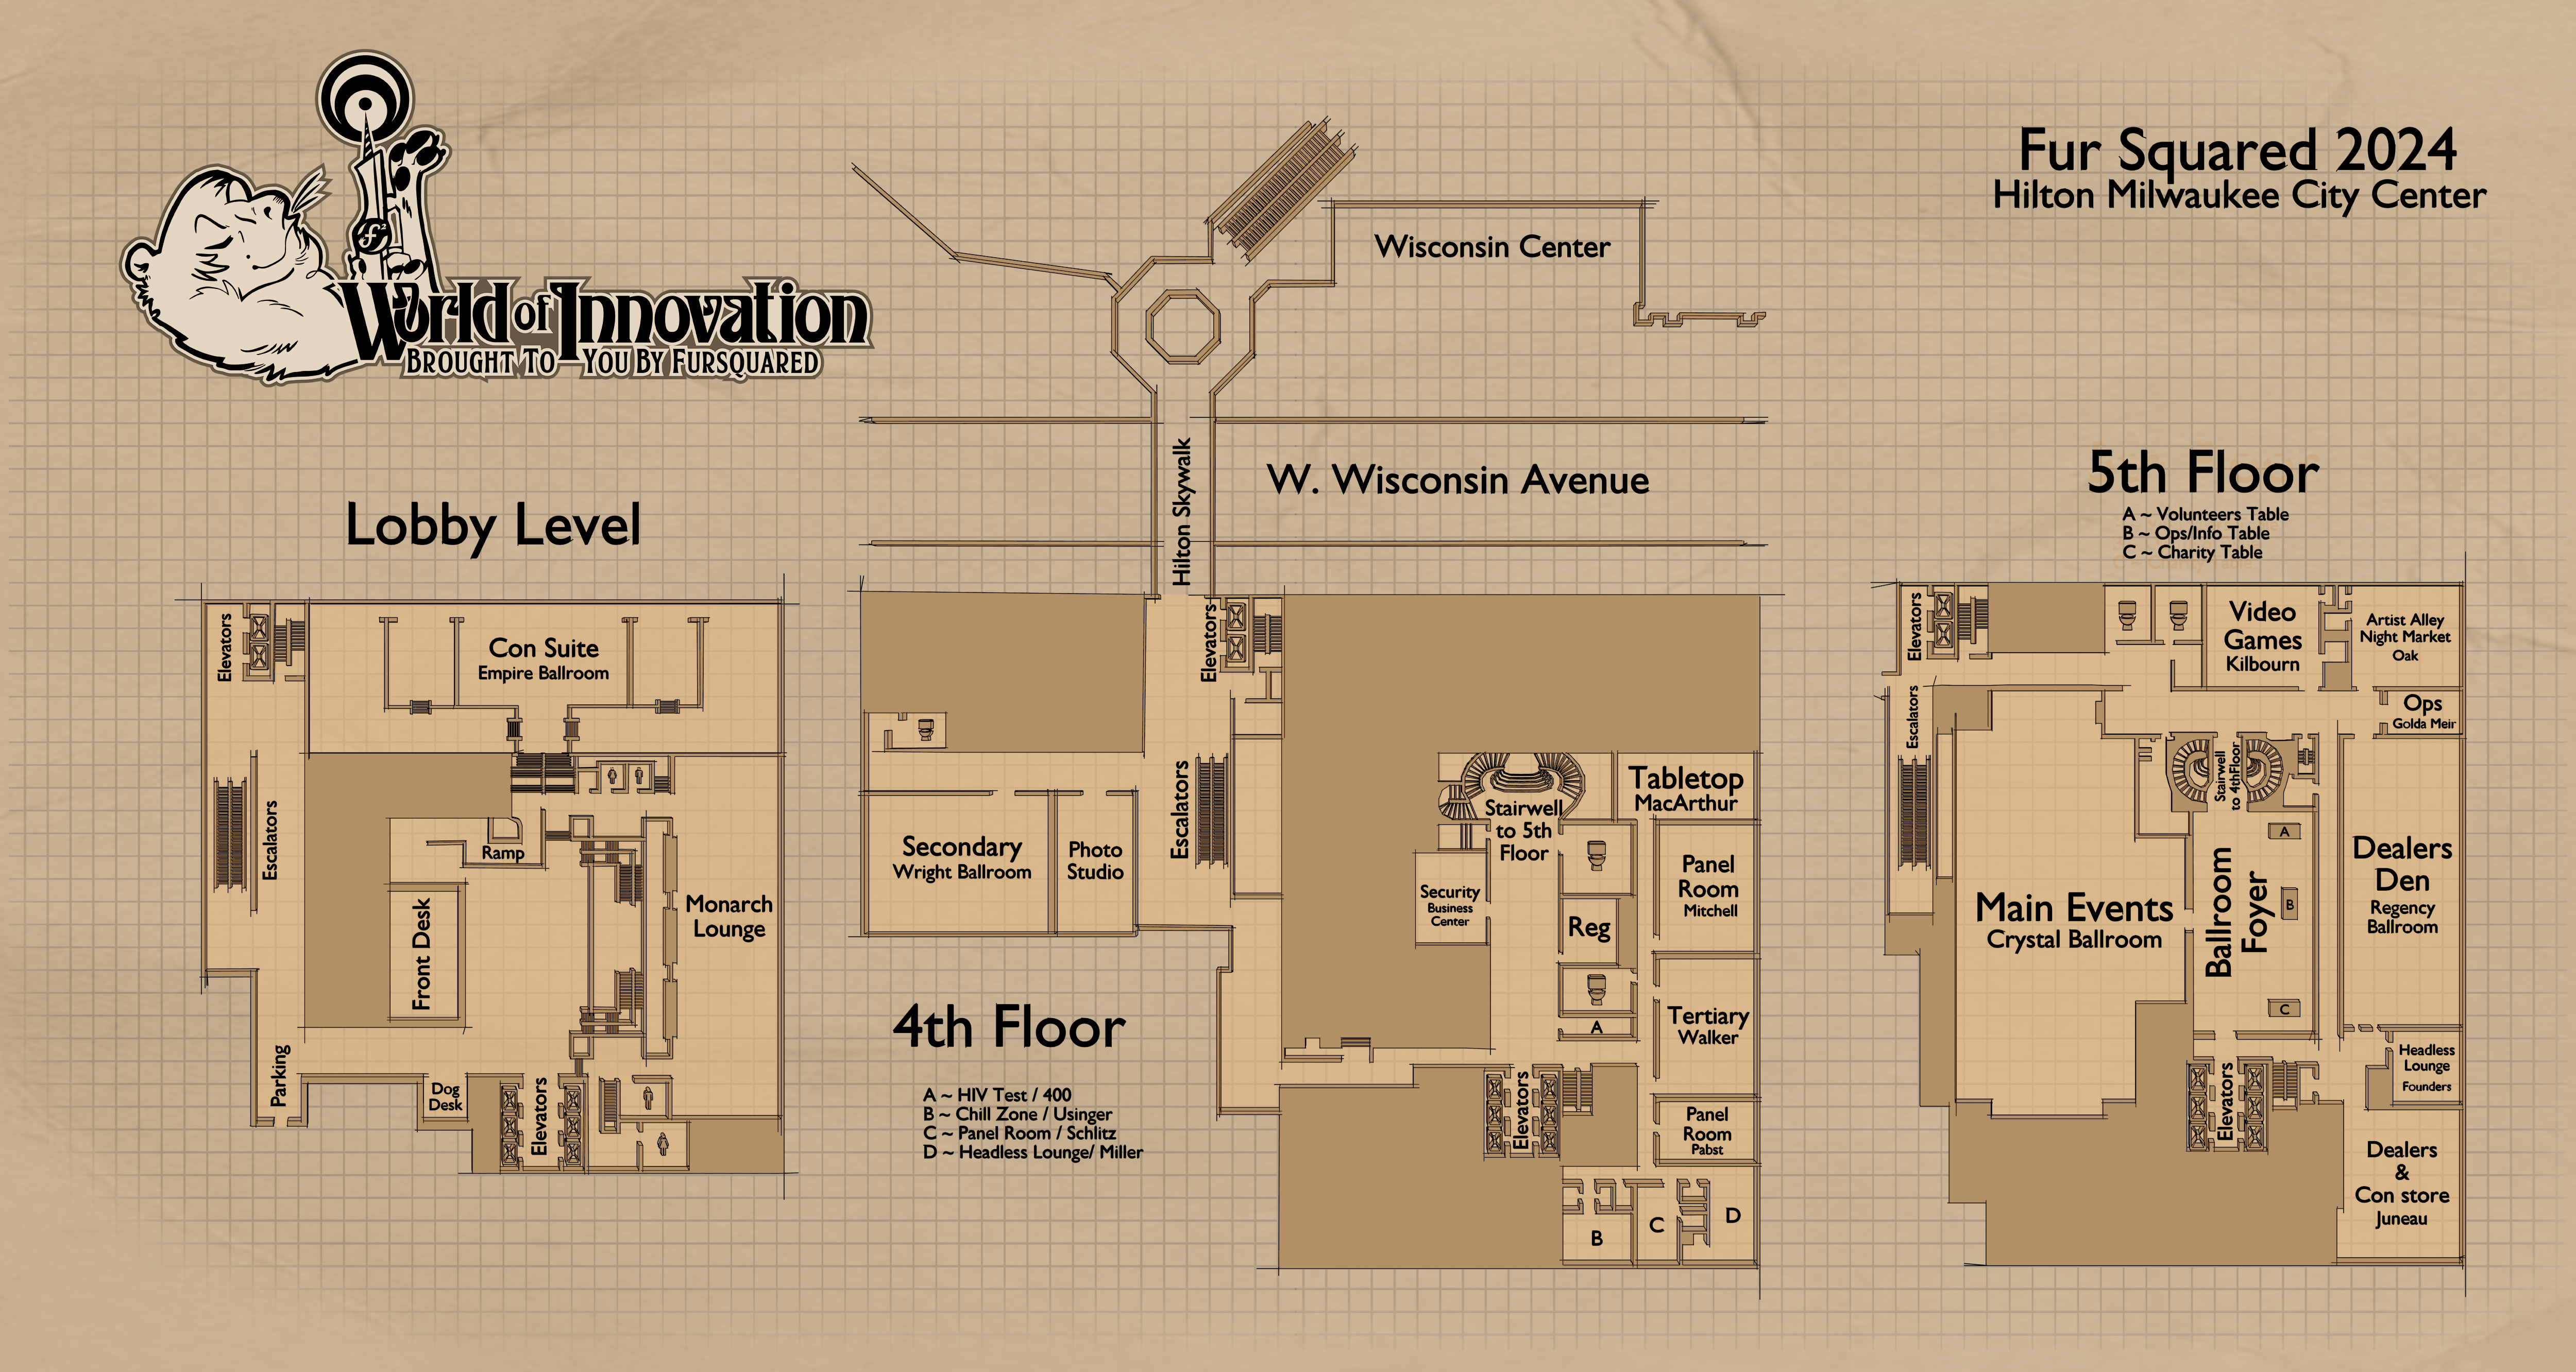 A map of the venue. Please ask a staff member any questions.